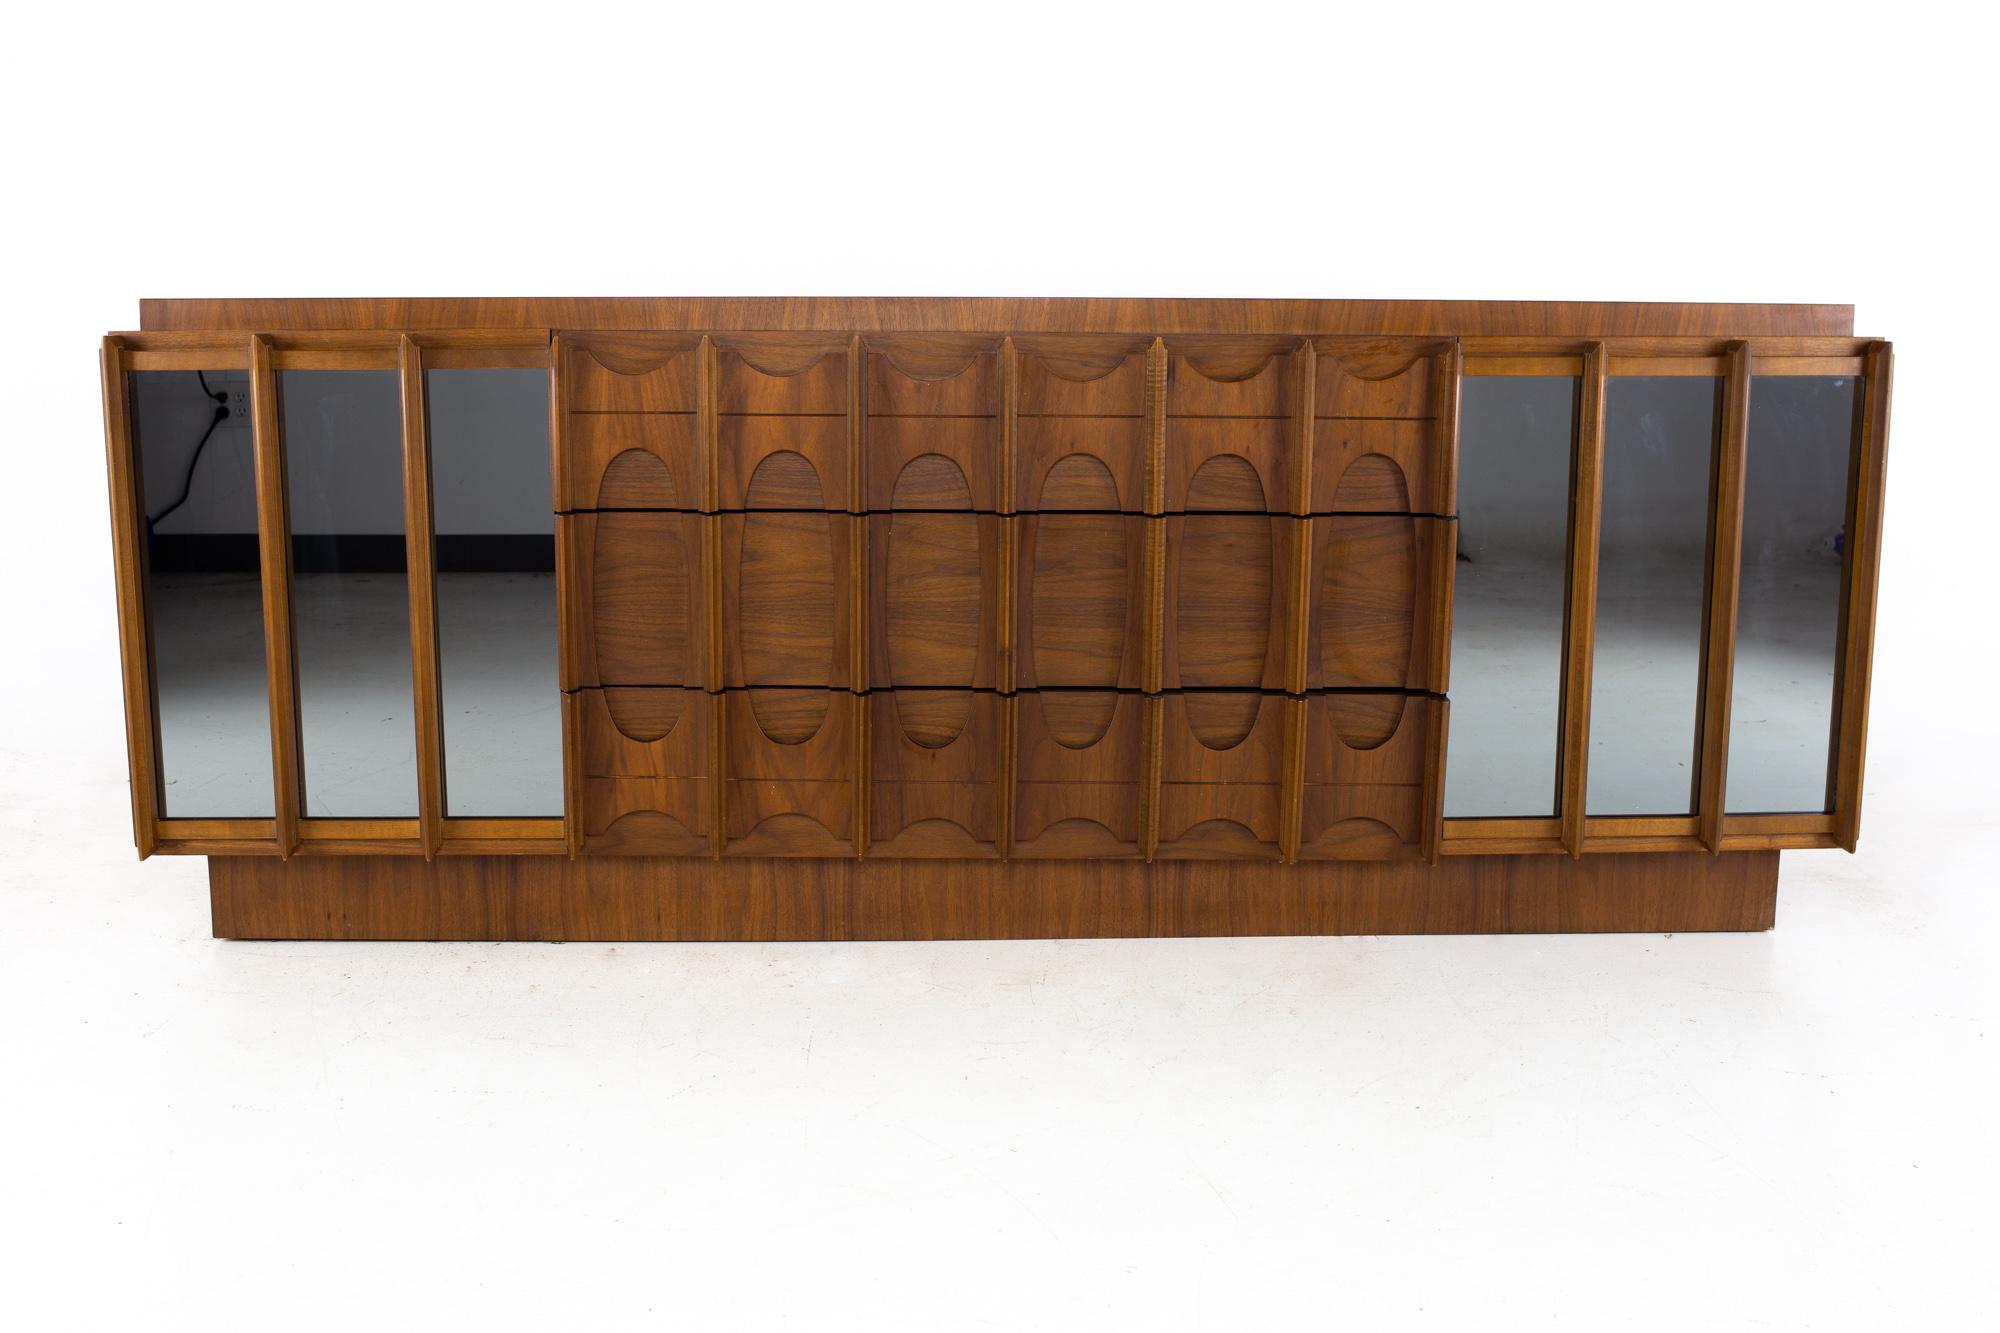 Tobago Brutalist mid century walnut and mirror 9 drawer lowboy dresser
Dresser measures: 80.25 wide x 21.75 deep x 30.5 inches high

All pieces of furniture can be had in what we call restored vintage condition. That means the piece is restored